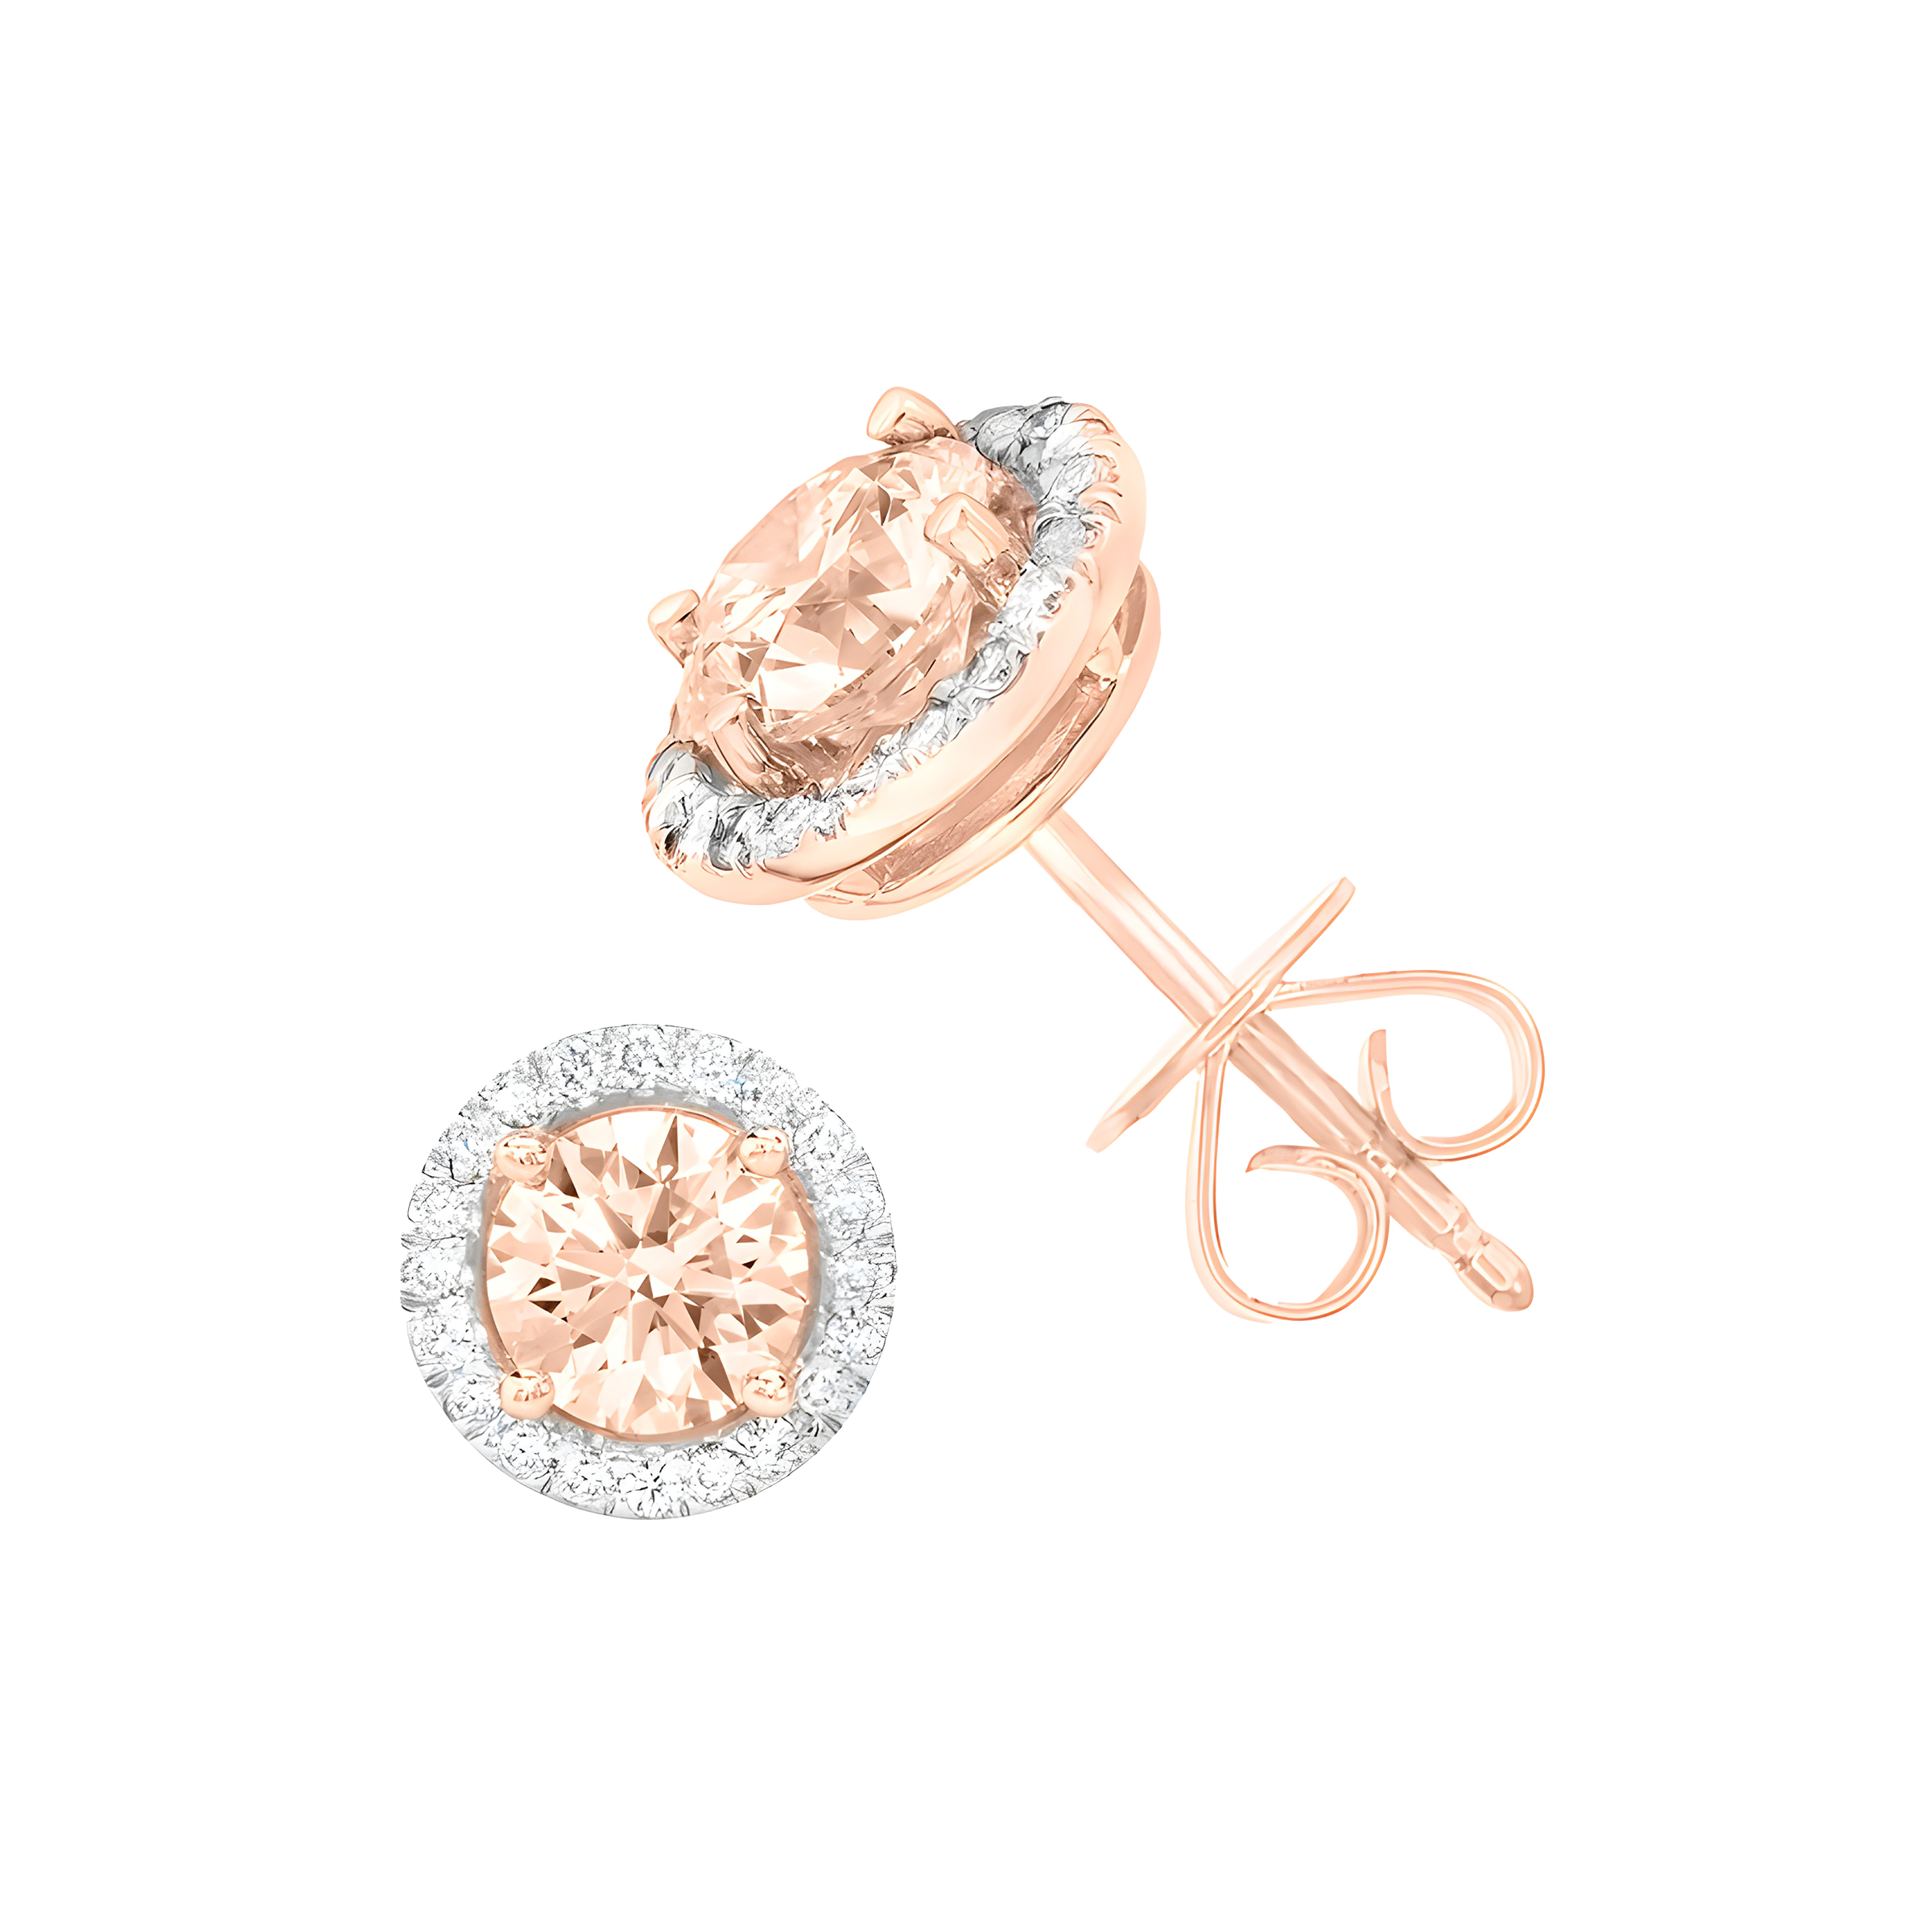 Round Morganite And Diamond Halo Stud Earrings in 18k Rose Gold